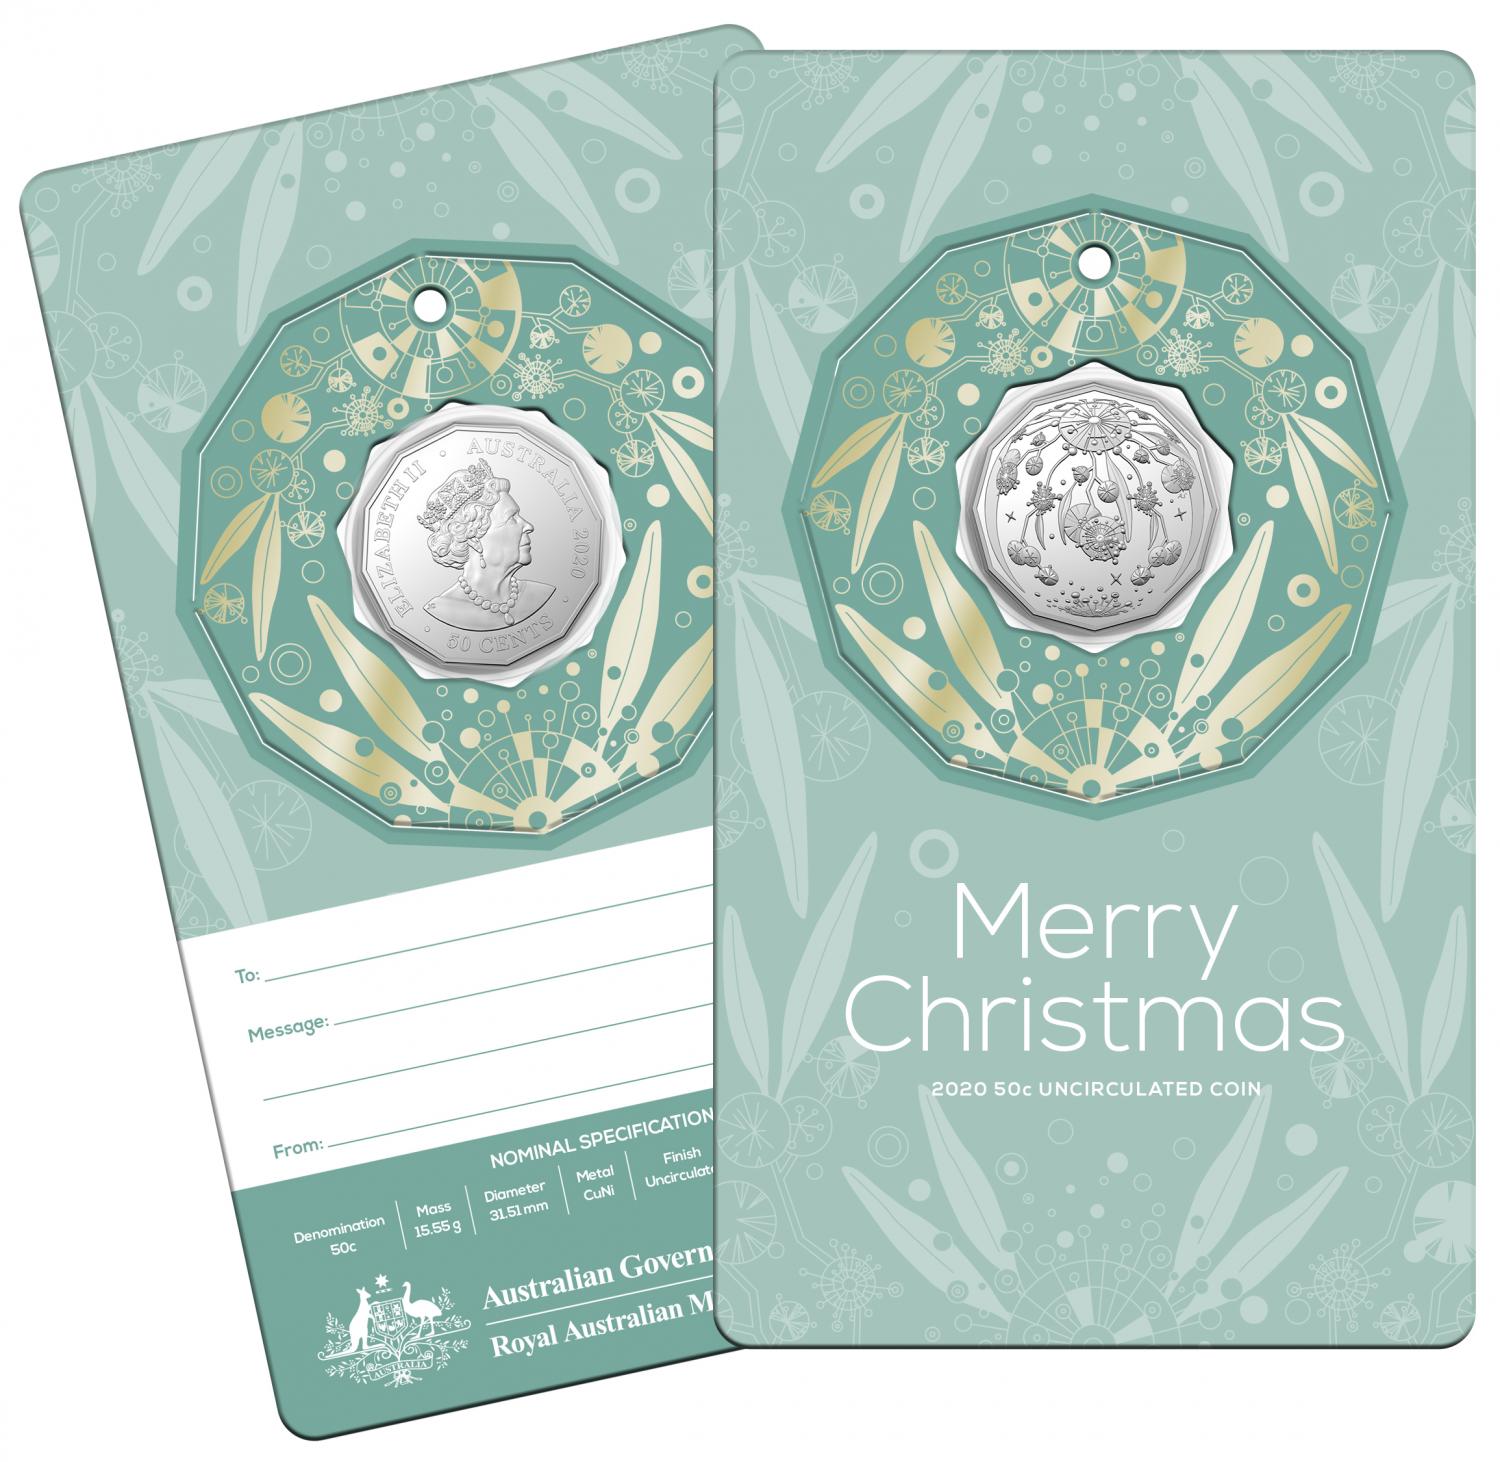 Thumbnail for 2020 Christmas .50c UNC Coin - Green Card Decoration